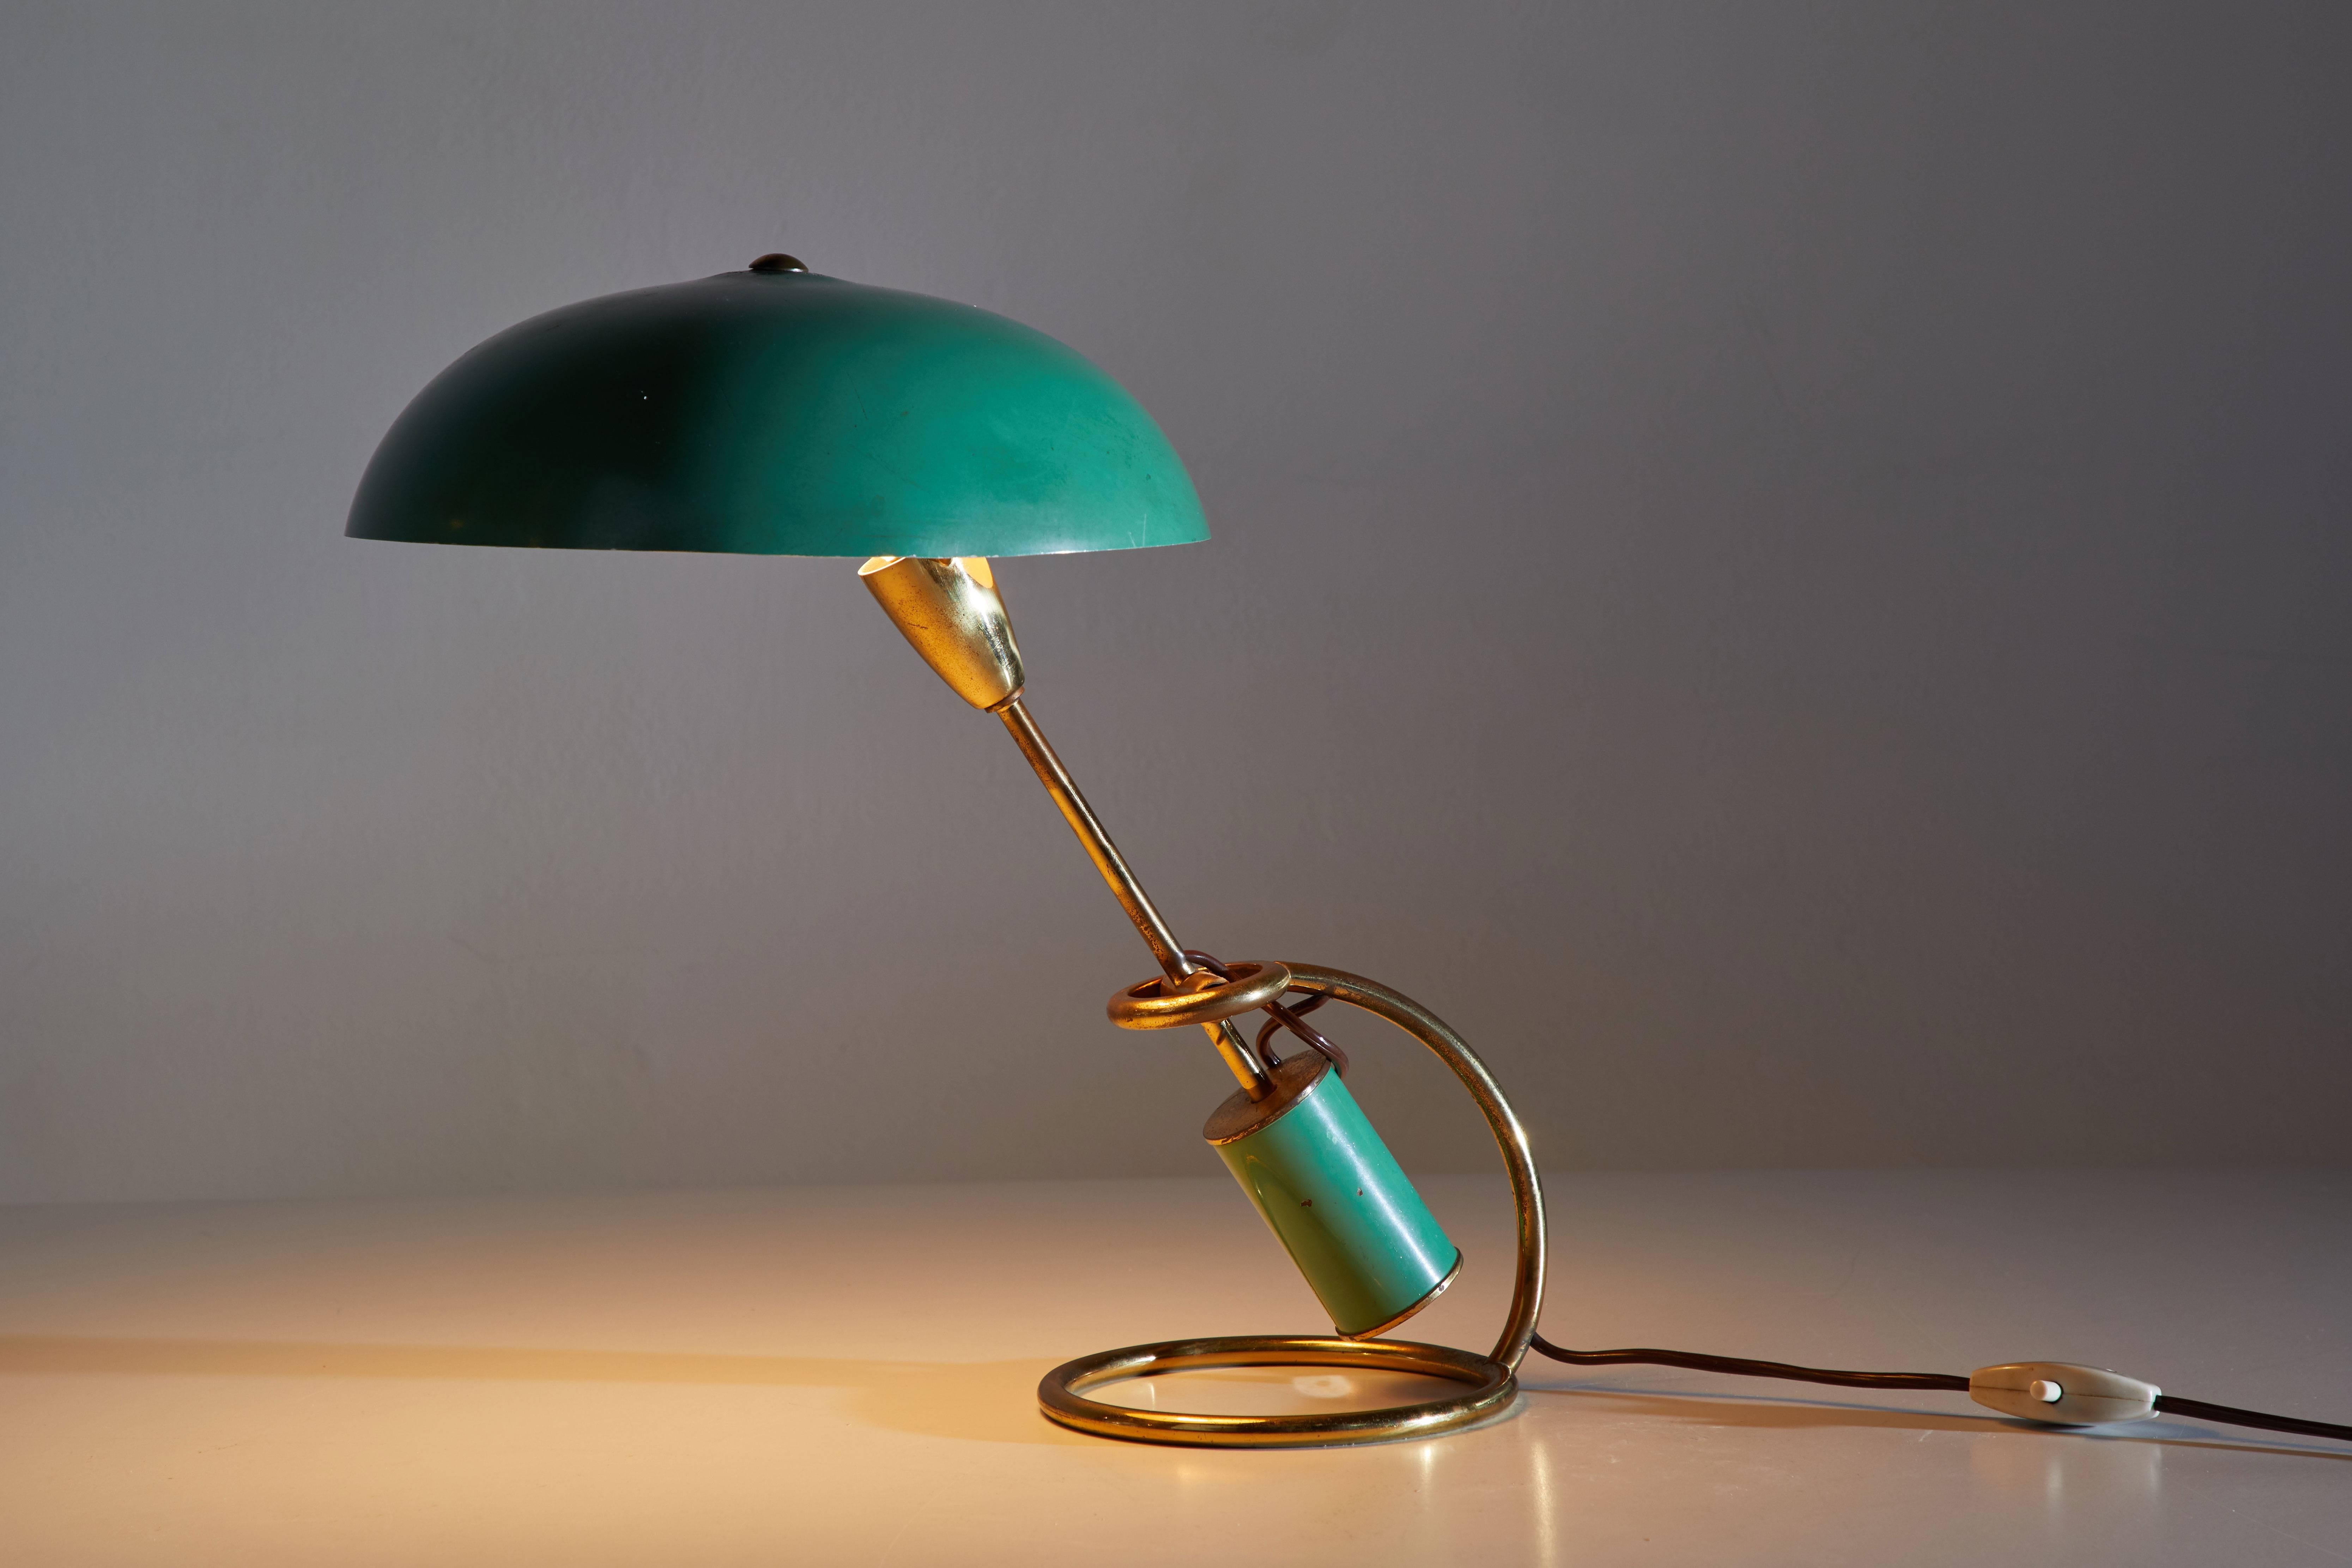 Table lamp designed by Angelo Lelli for Arredoluce in Italy, circa 1950s. Brass and enameled metal. Original enamel color. Original cord. Retains original manufacturer's stamp to base. Takes one E14 60w maximum bulb.